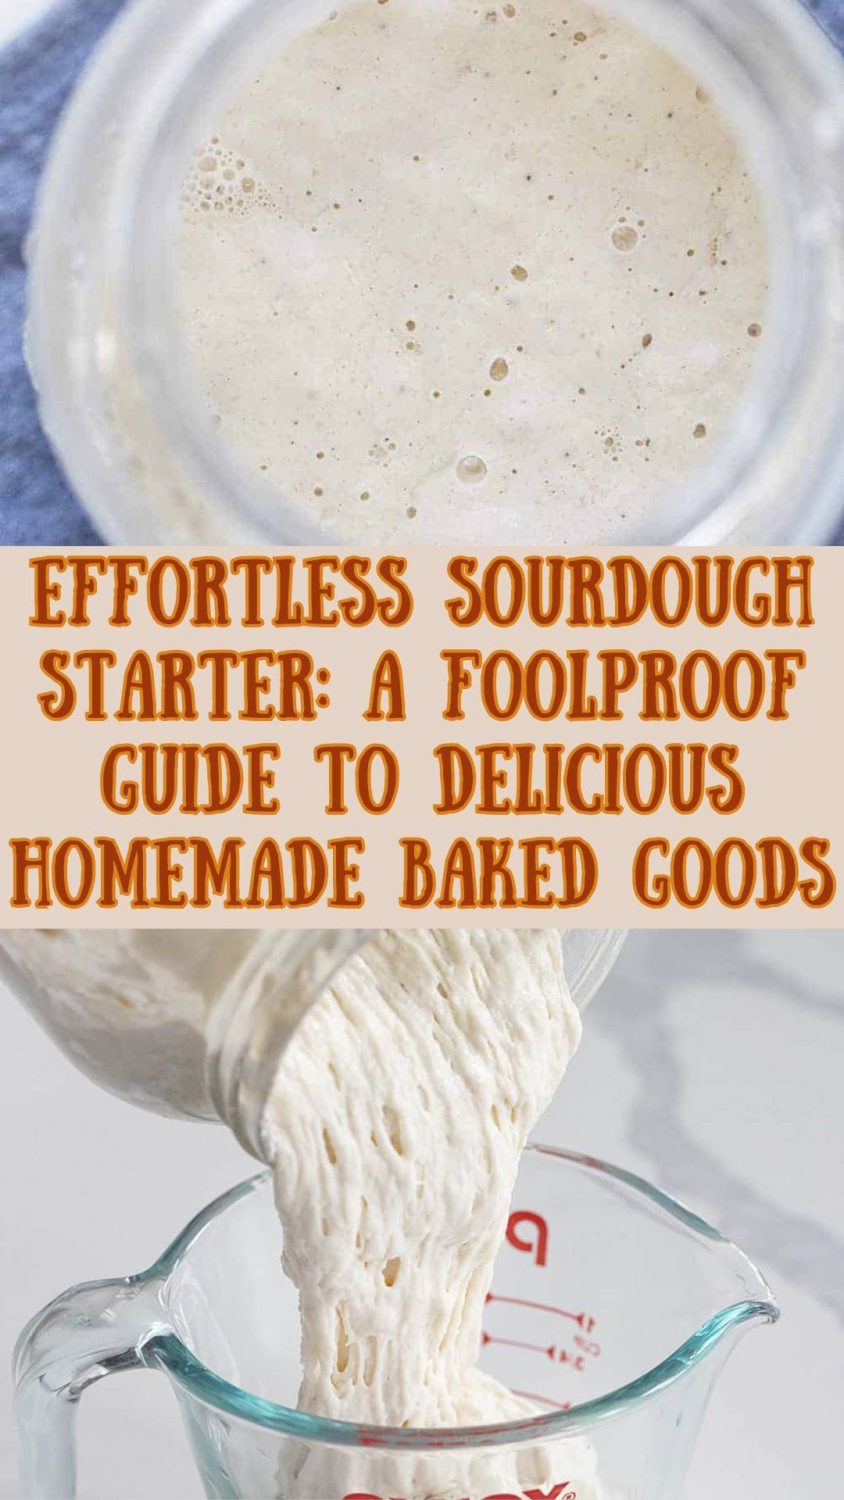 Effortless Sourdough Starter: A Foolproof Guide to Delicious Homemade Baked Goods